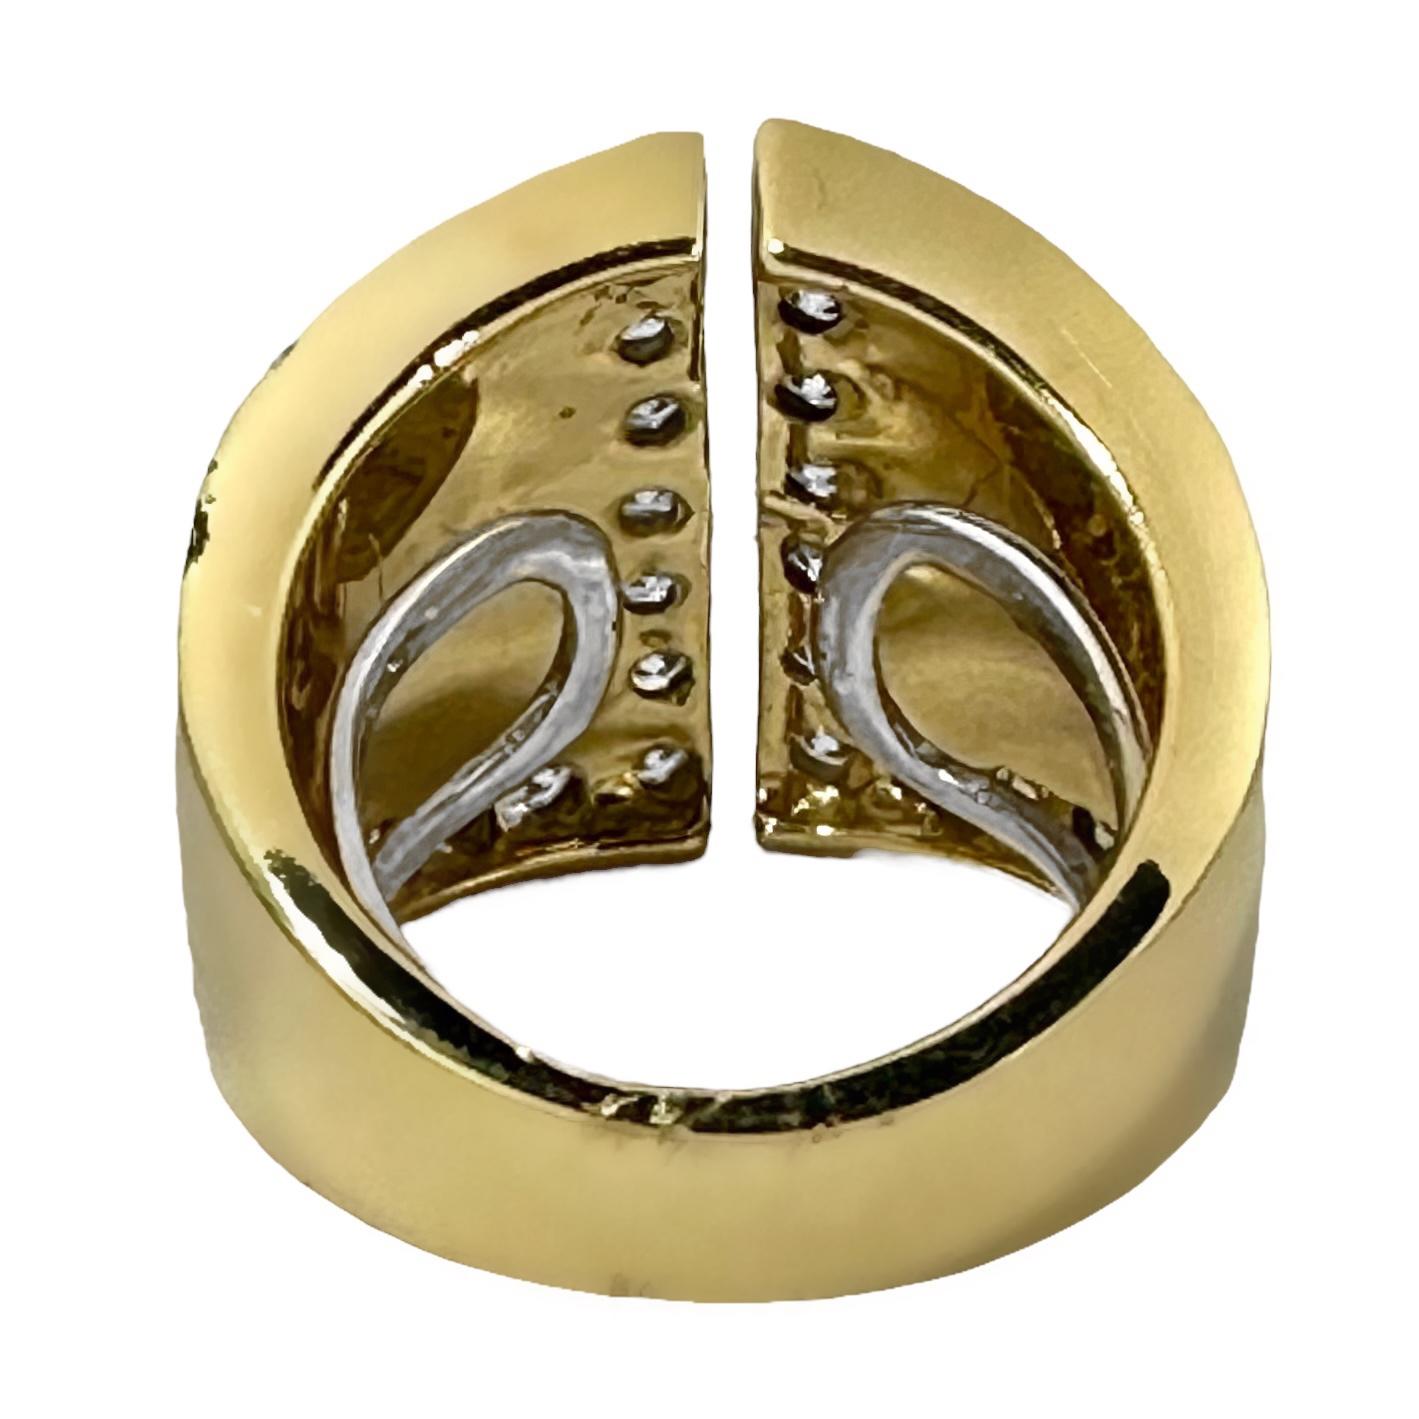 Contemporary Split Front 18k Yellow Gold Ring with Black Enamel and Diamonds